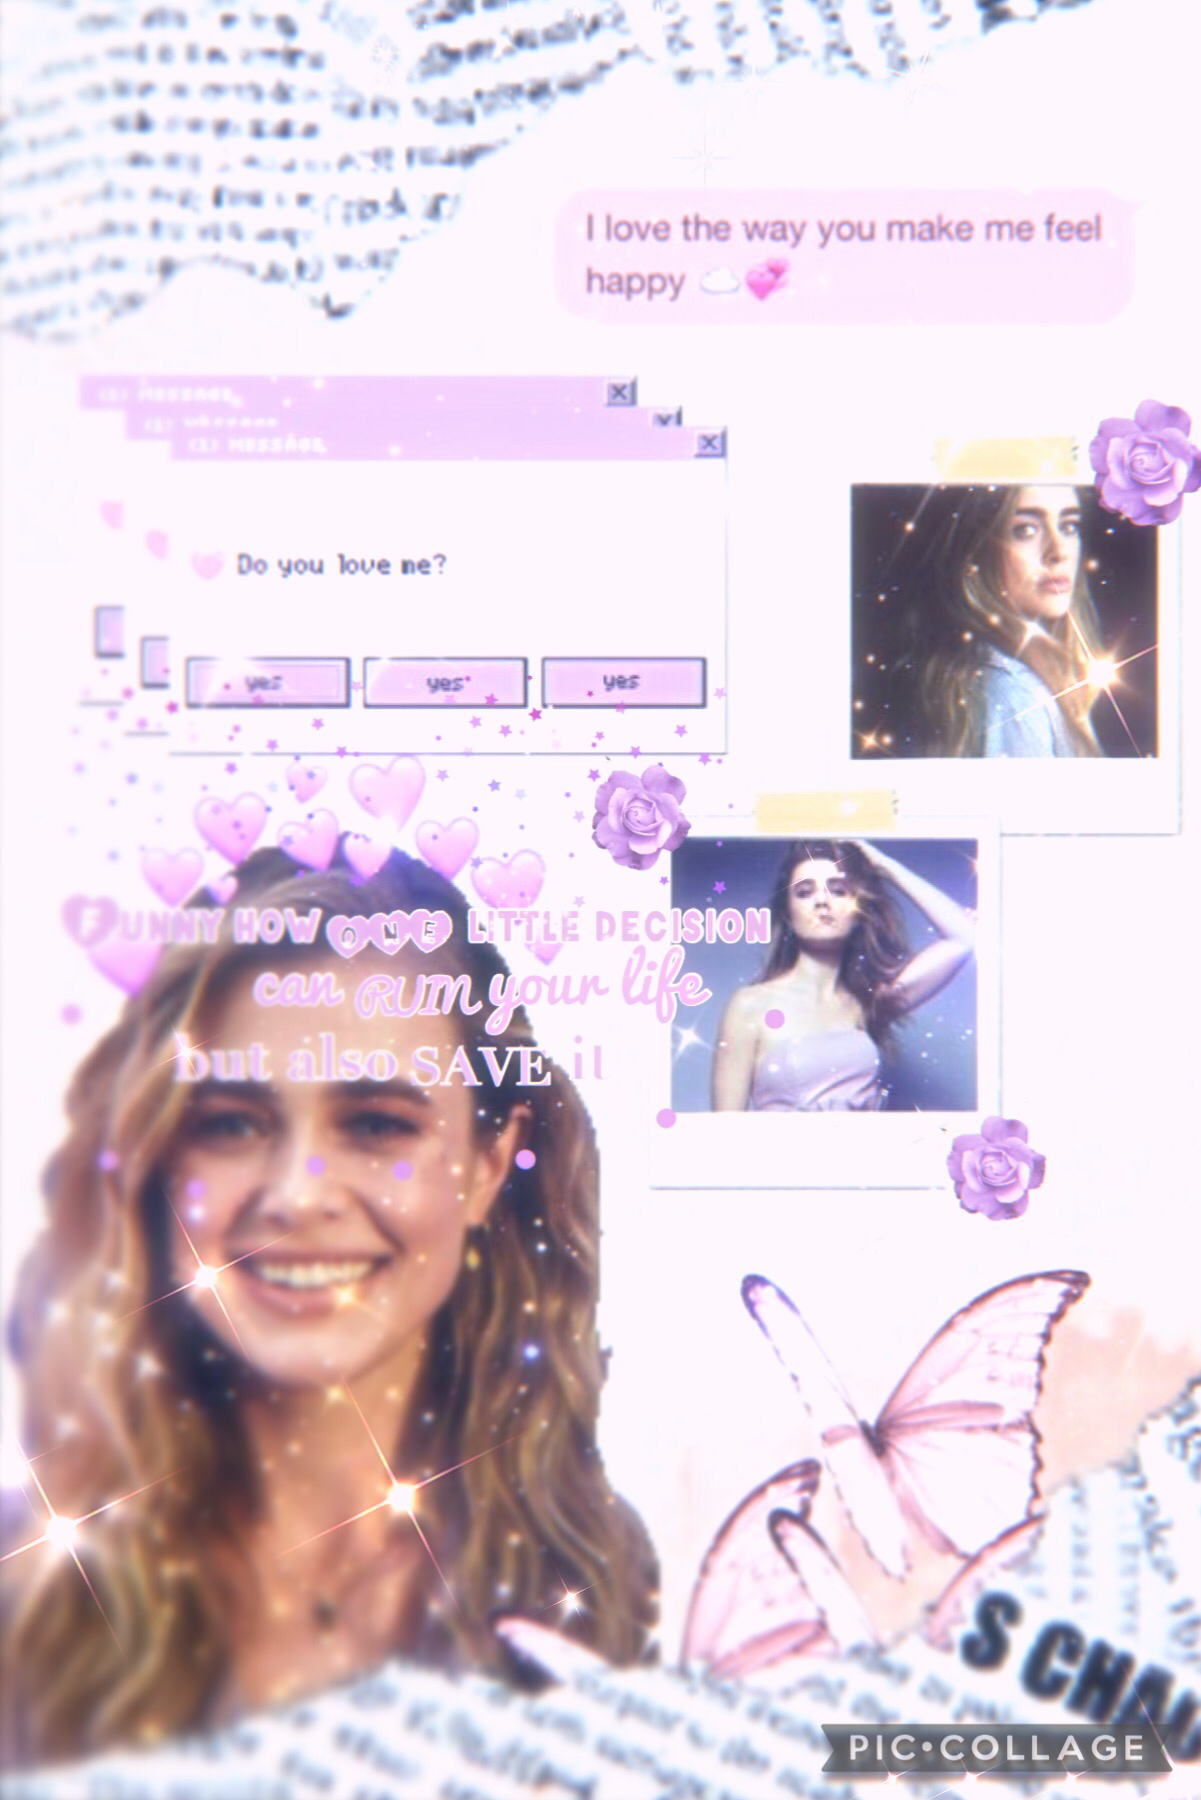 Collab with the amazing me_4life we did melissa roxburgh from manifest! 💜